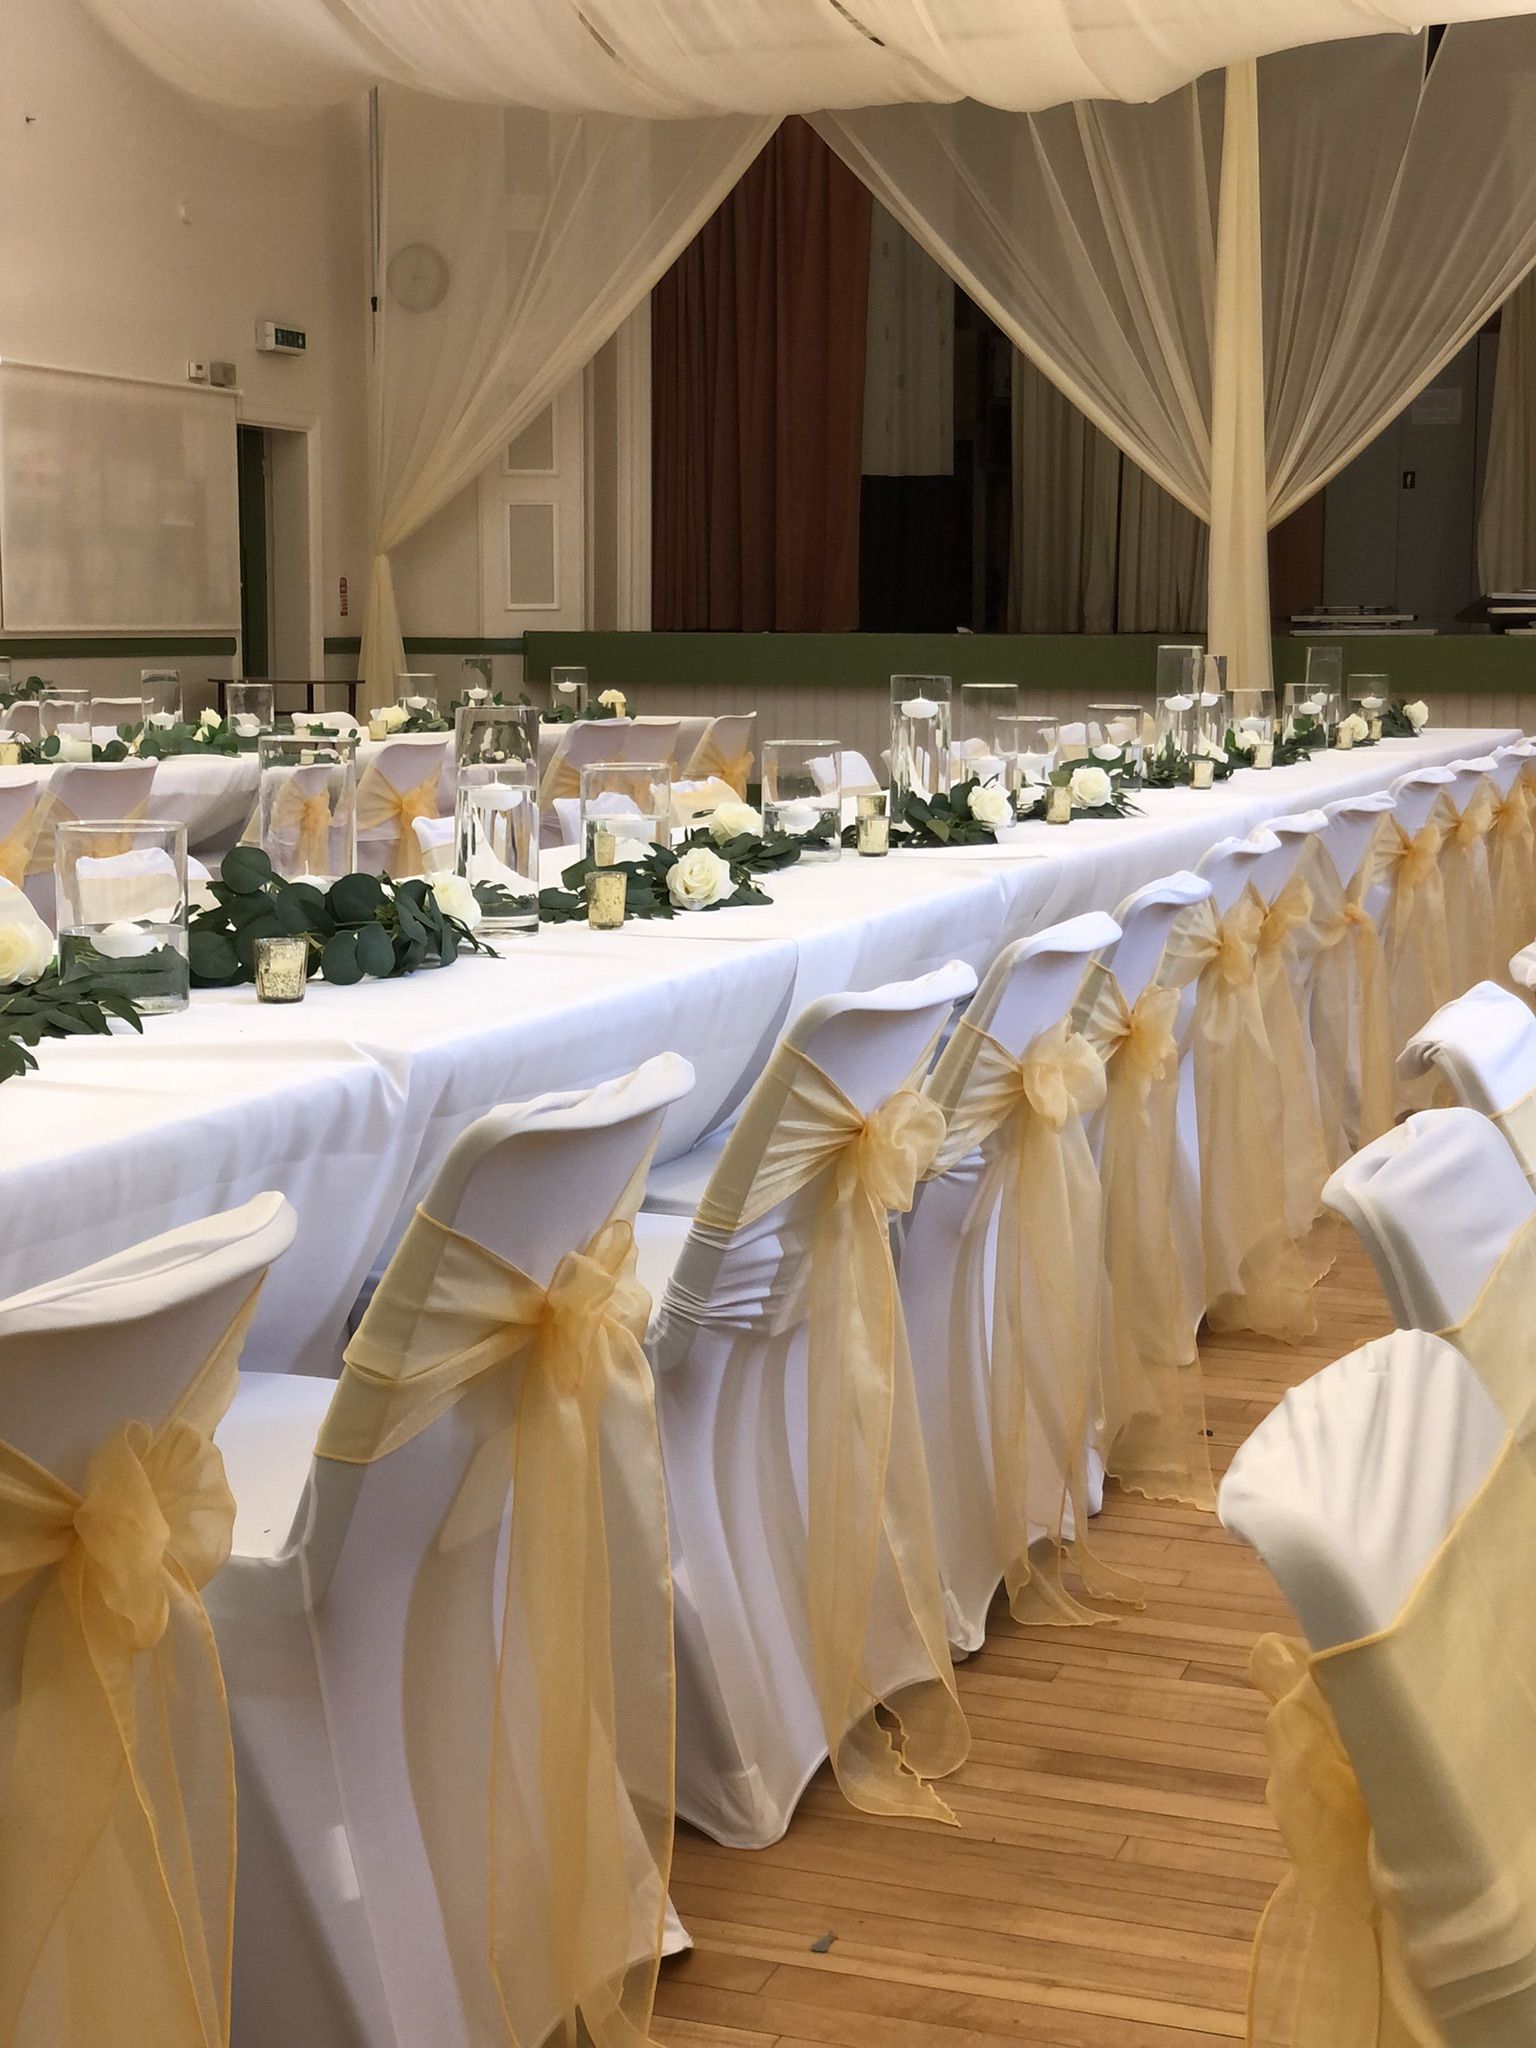 a banquet hall with tables covered in white and yellow cloths.